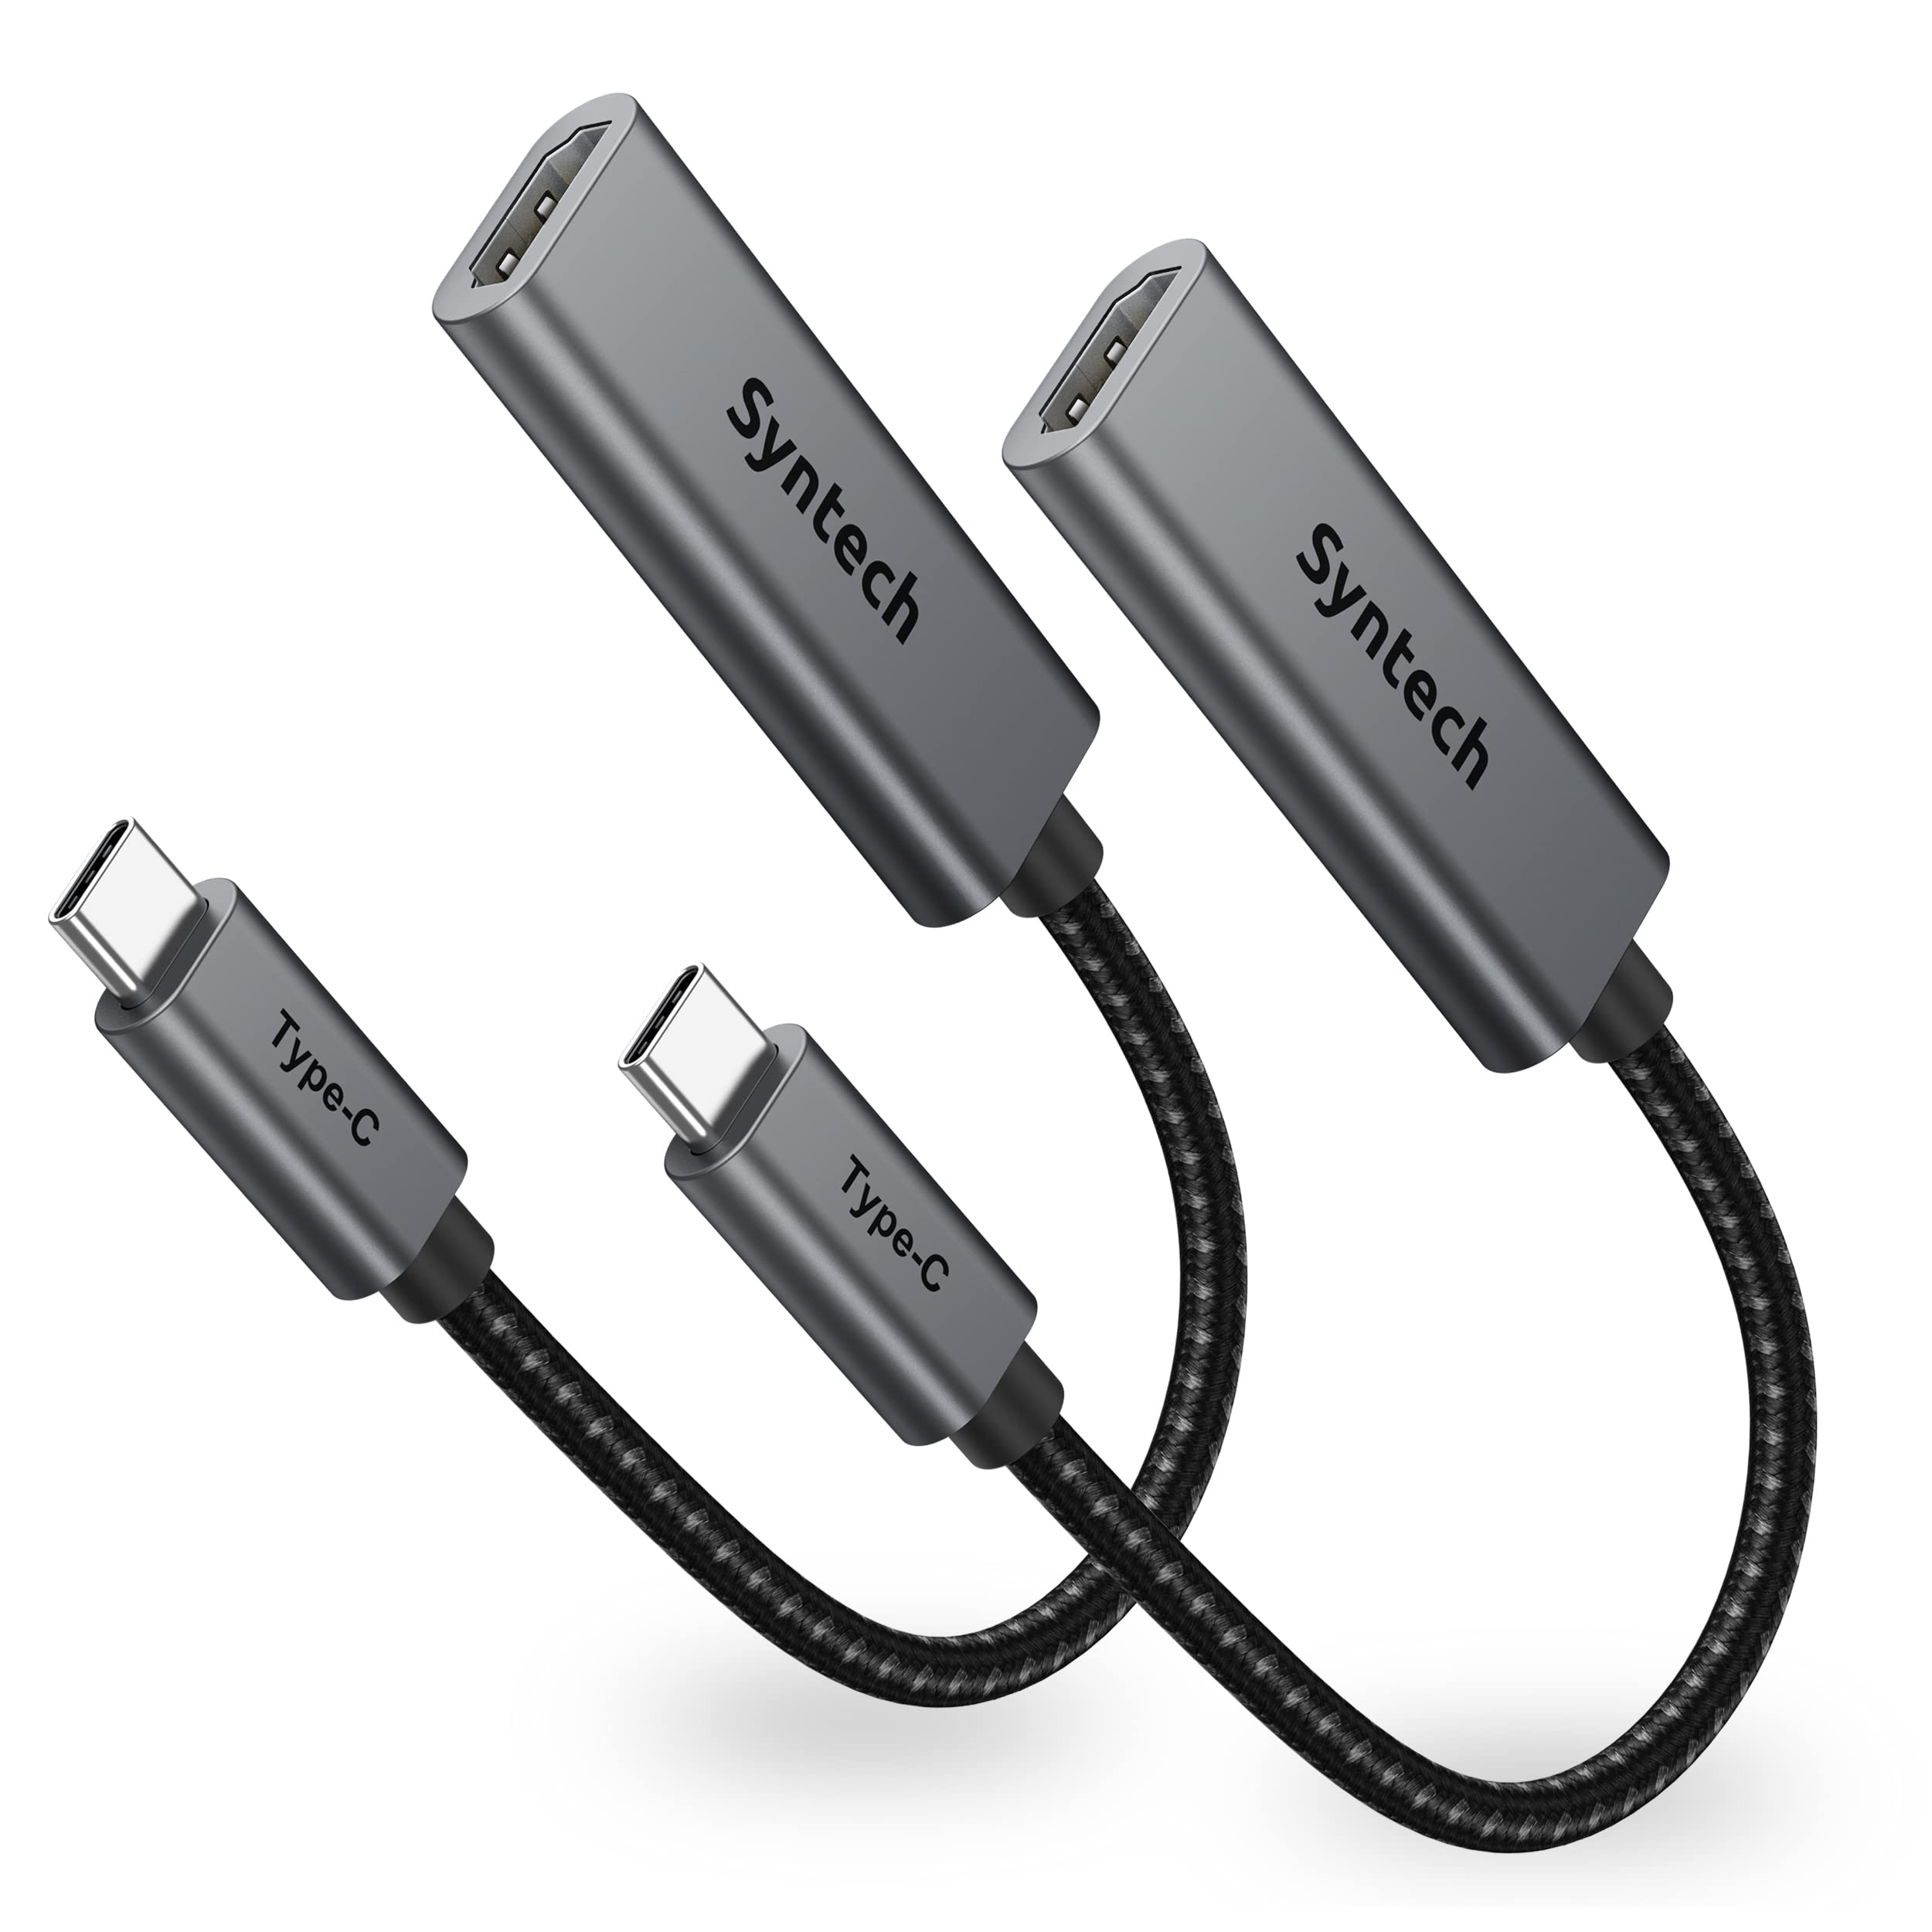 USB C to HDMI Cable 2 pack